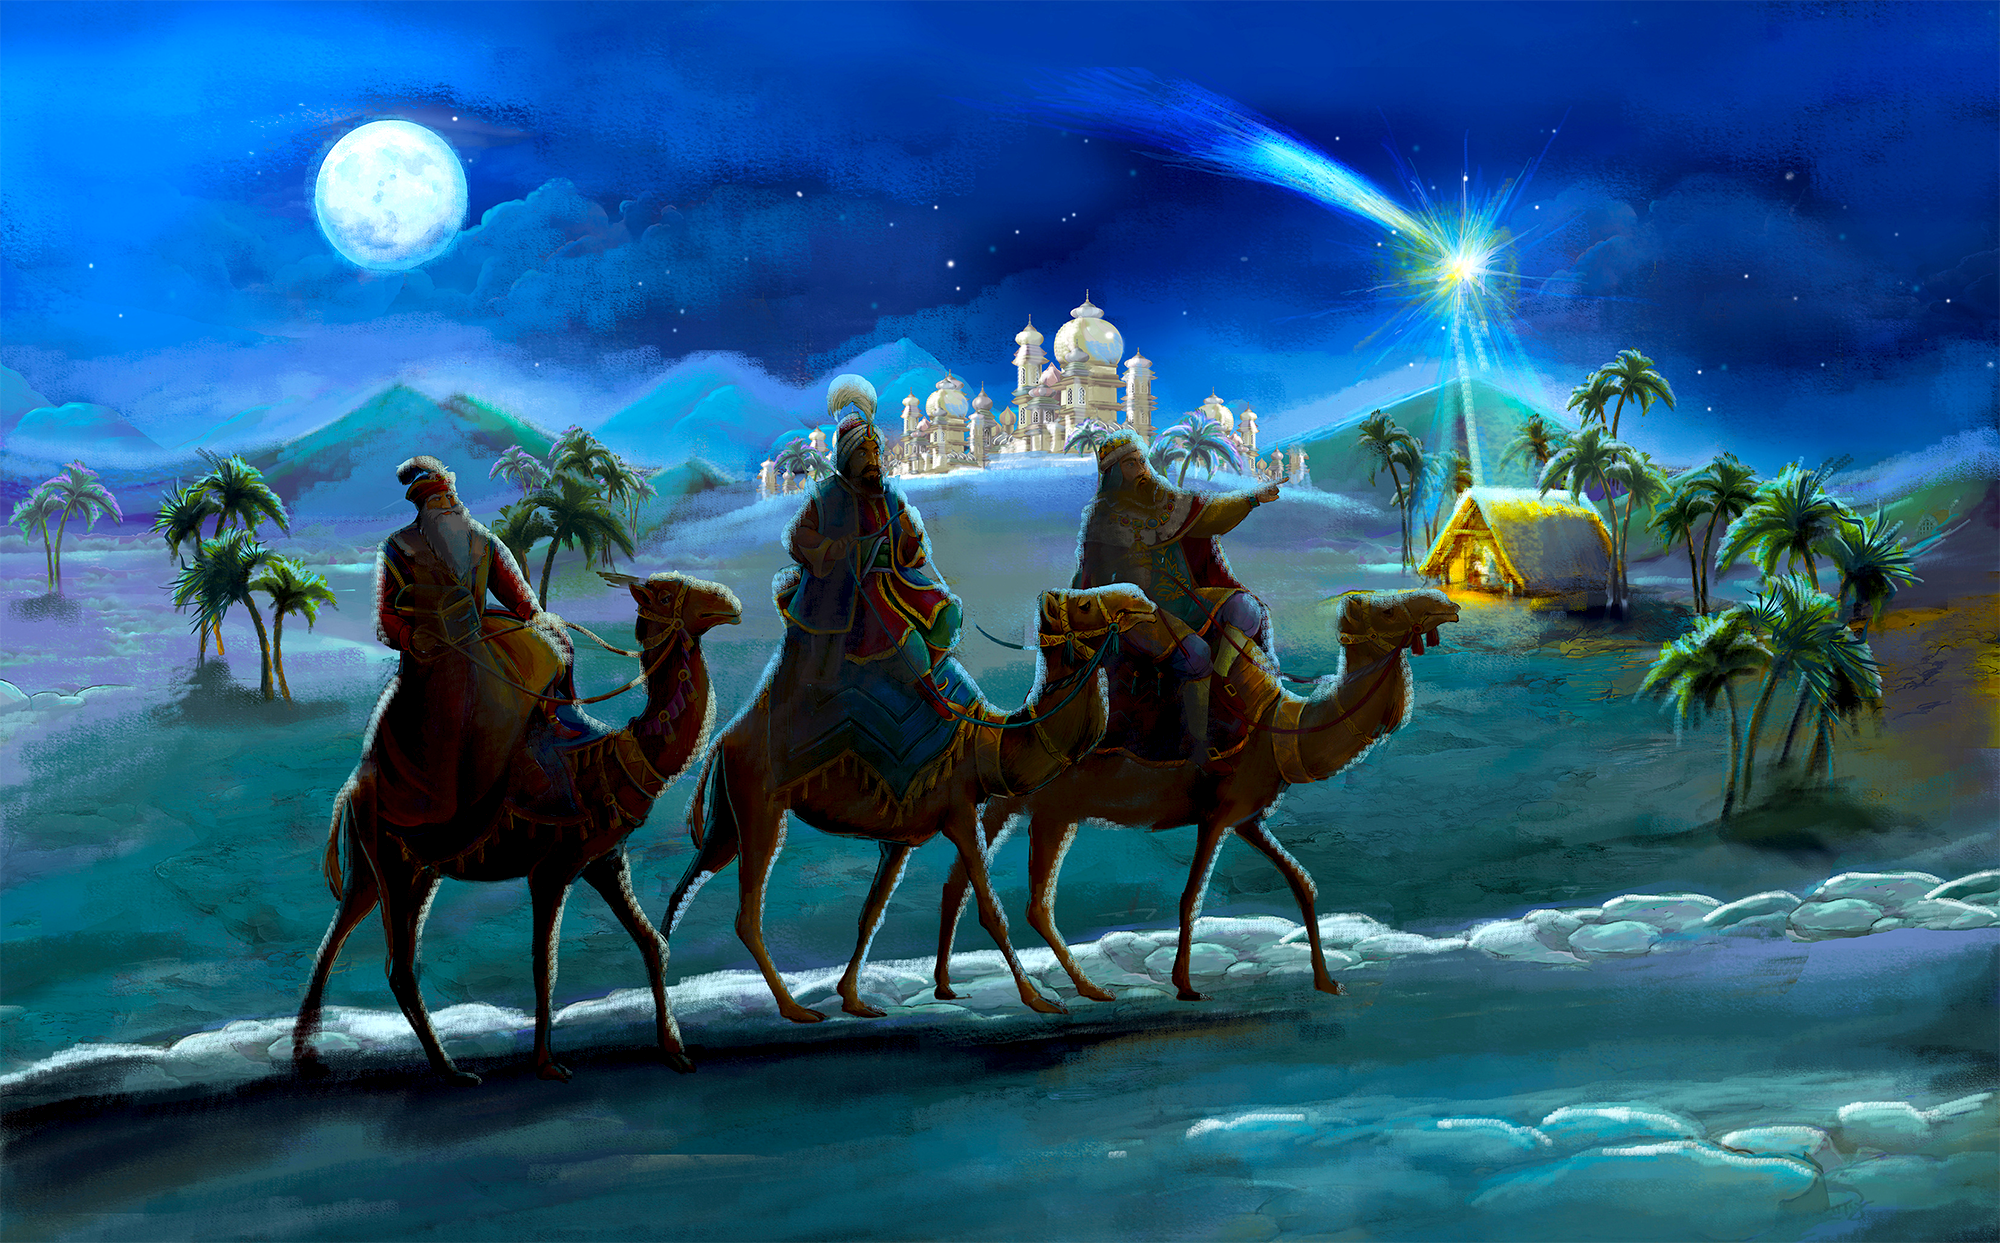 3 Wise Men Following the Star